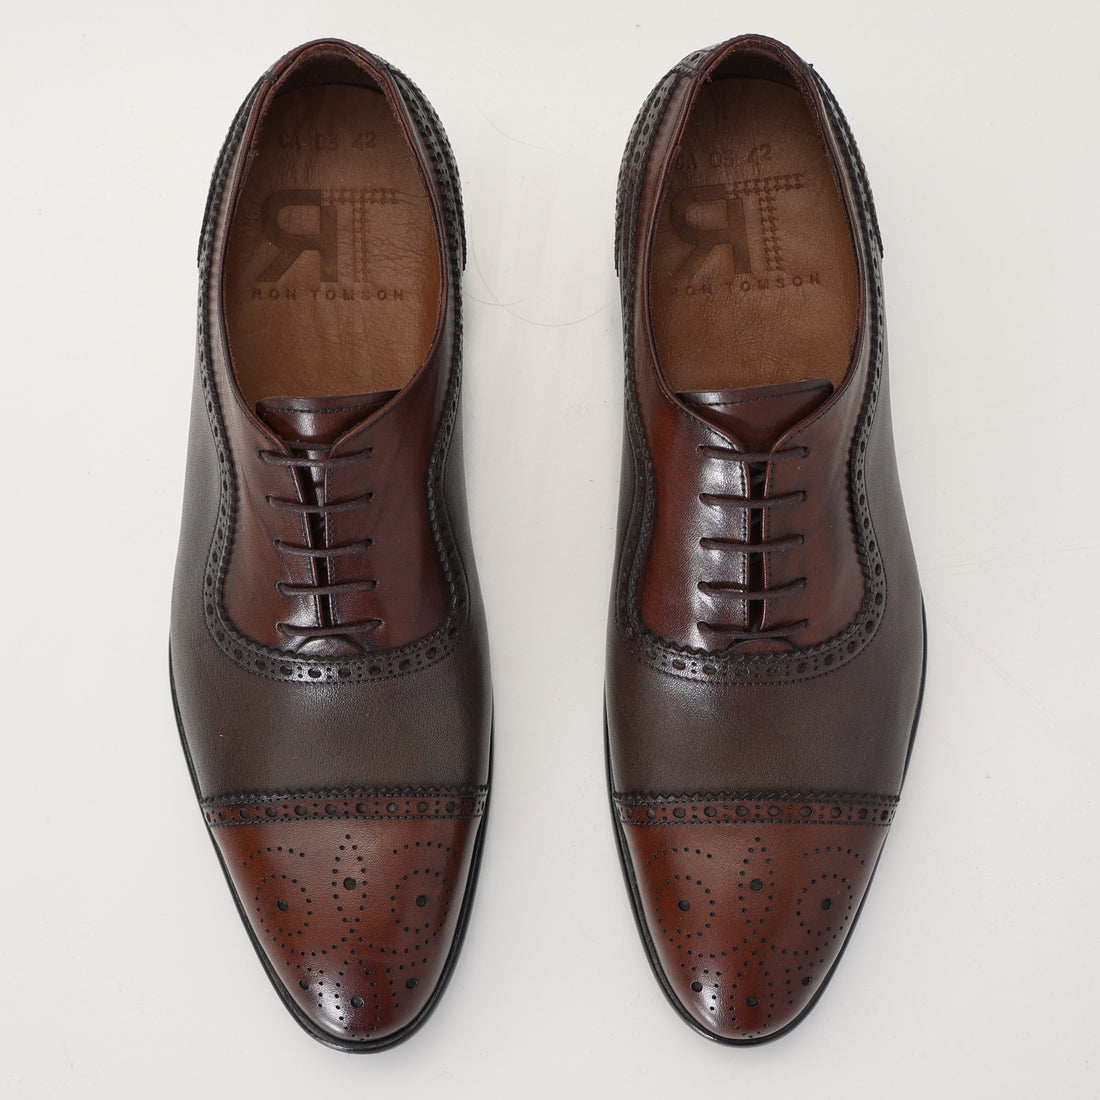 N° CA03 Hand Made Full Brogue LEATHER CAP TOE DERBY SHOES - BROWN & Green